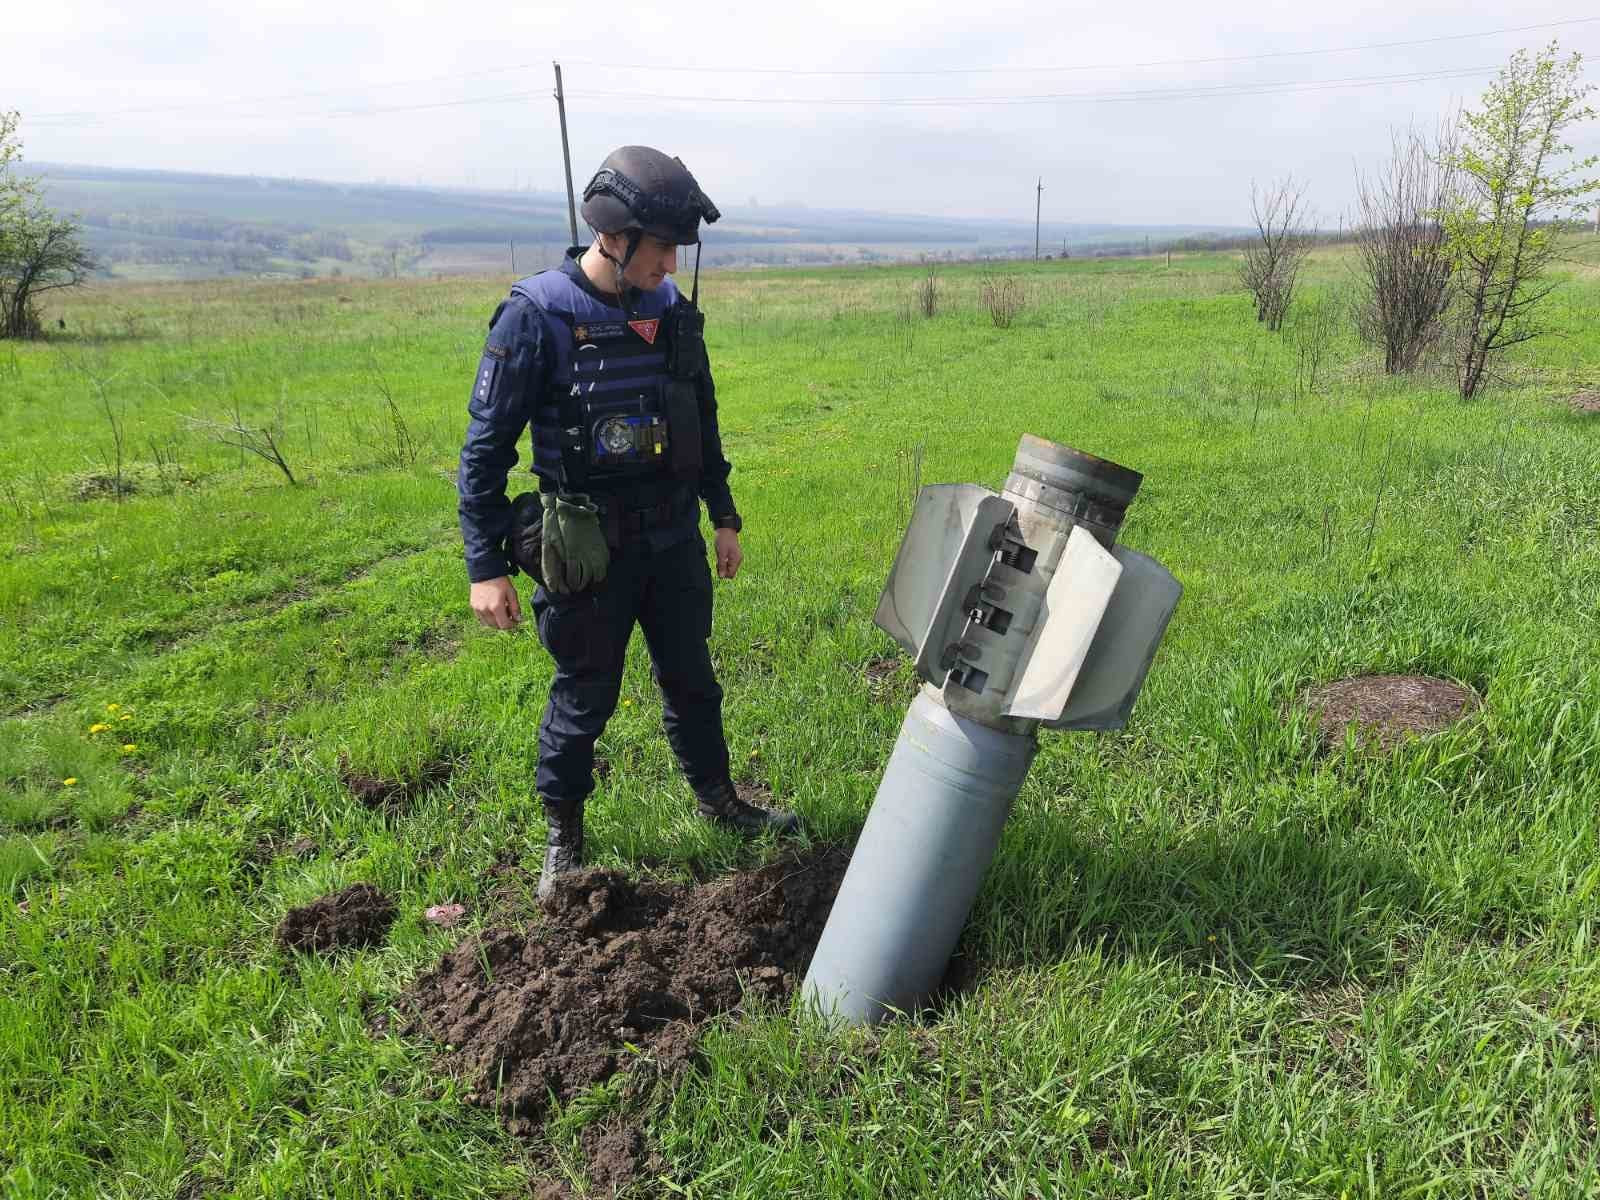 Russian missile in the Ukrainian field  (C) The State Emergency Service of Ukraine